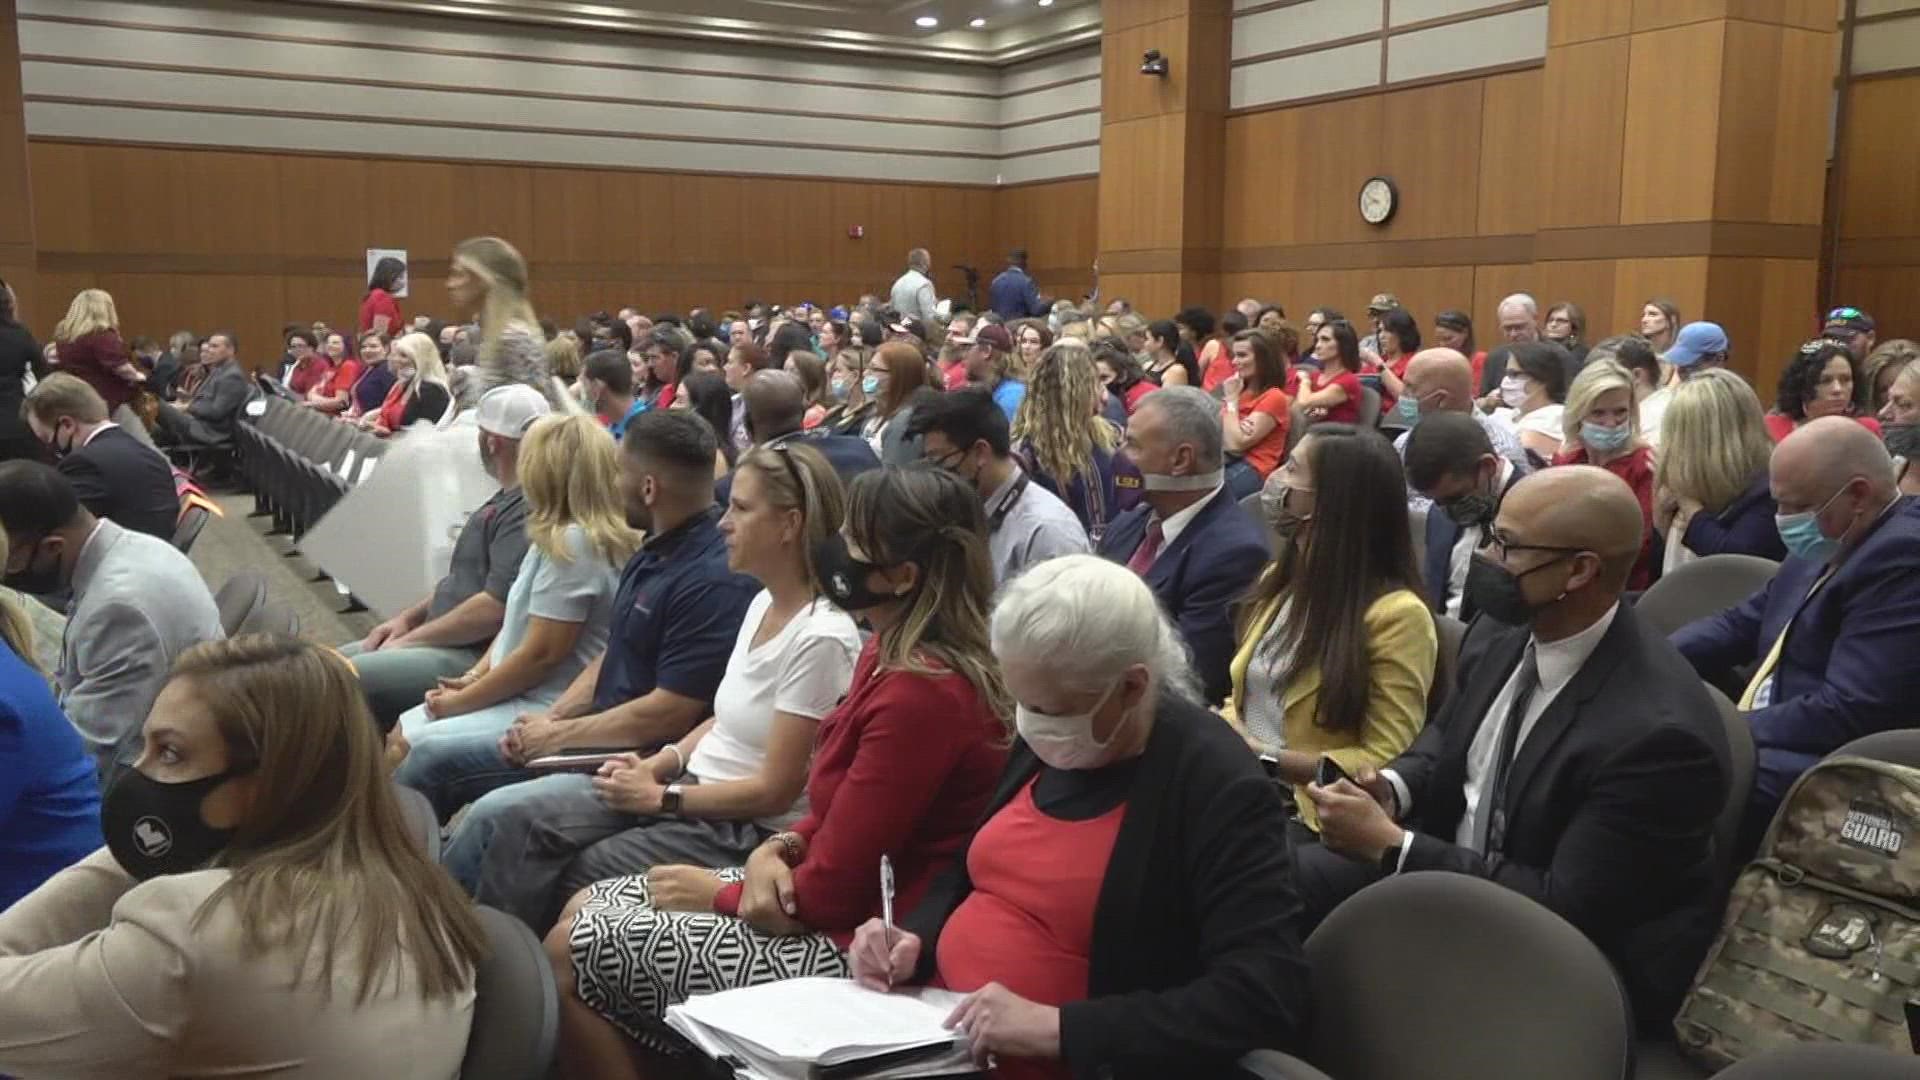 Unmasked parents packed the BESE meeting demanding their child to not wear masks in classrooms.